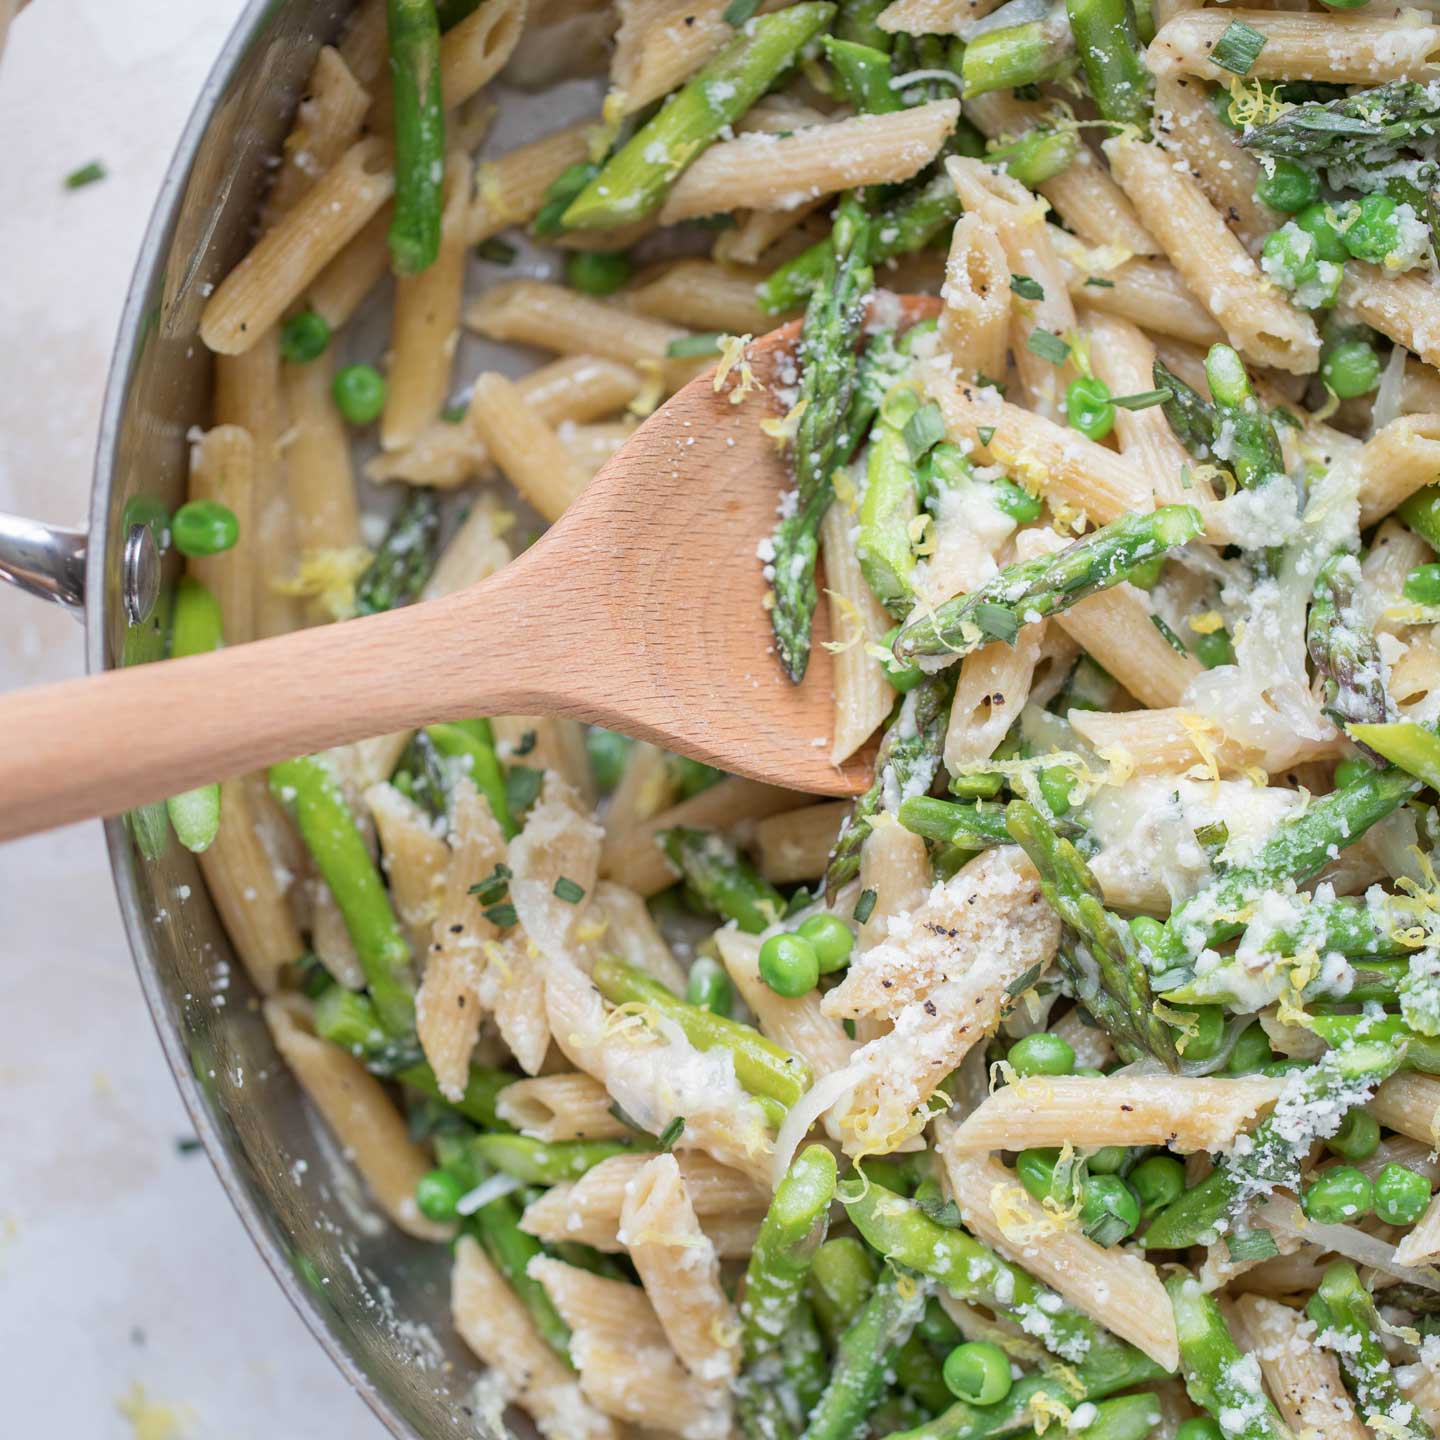 Dish up big, big comforting flavors with this whole-wheat pasta with asparagus, peas, parmesan, shallot, lemon and tarragon. So much to love about this vibrantly delicious skillet meal!